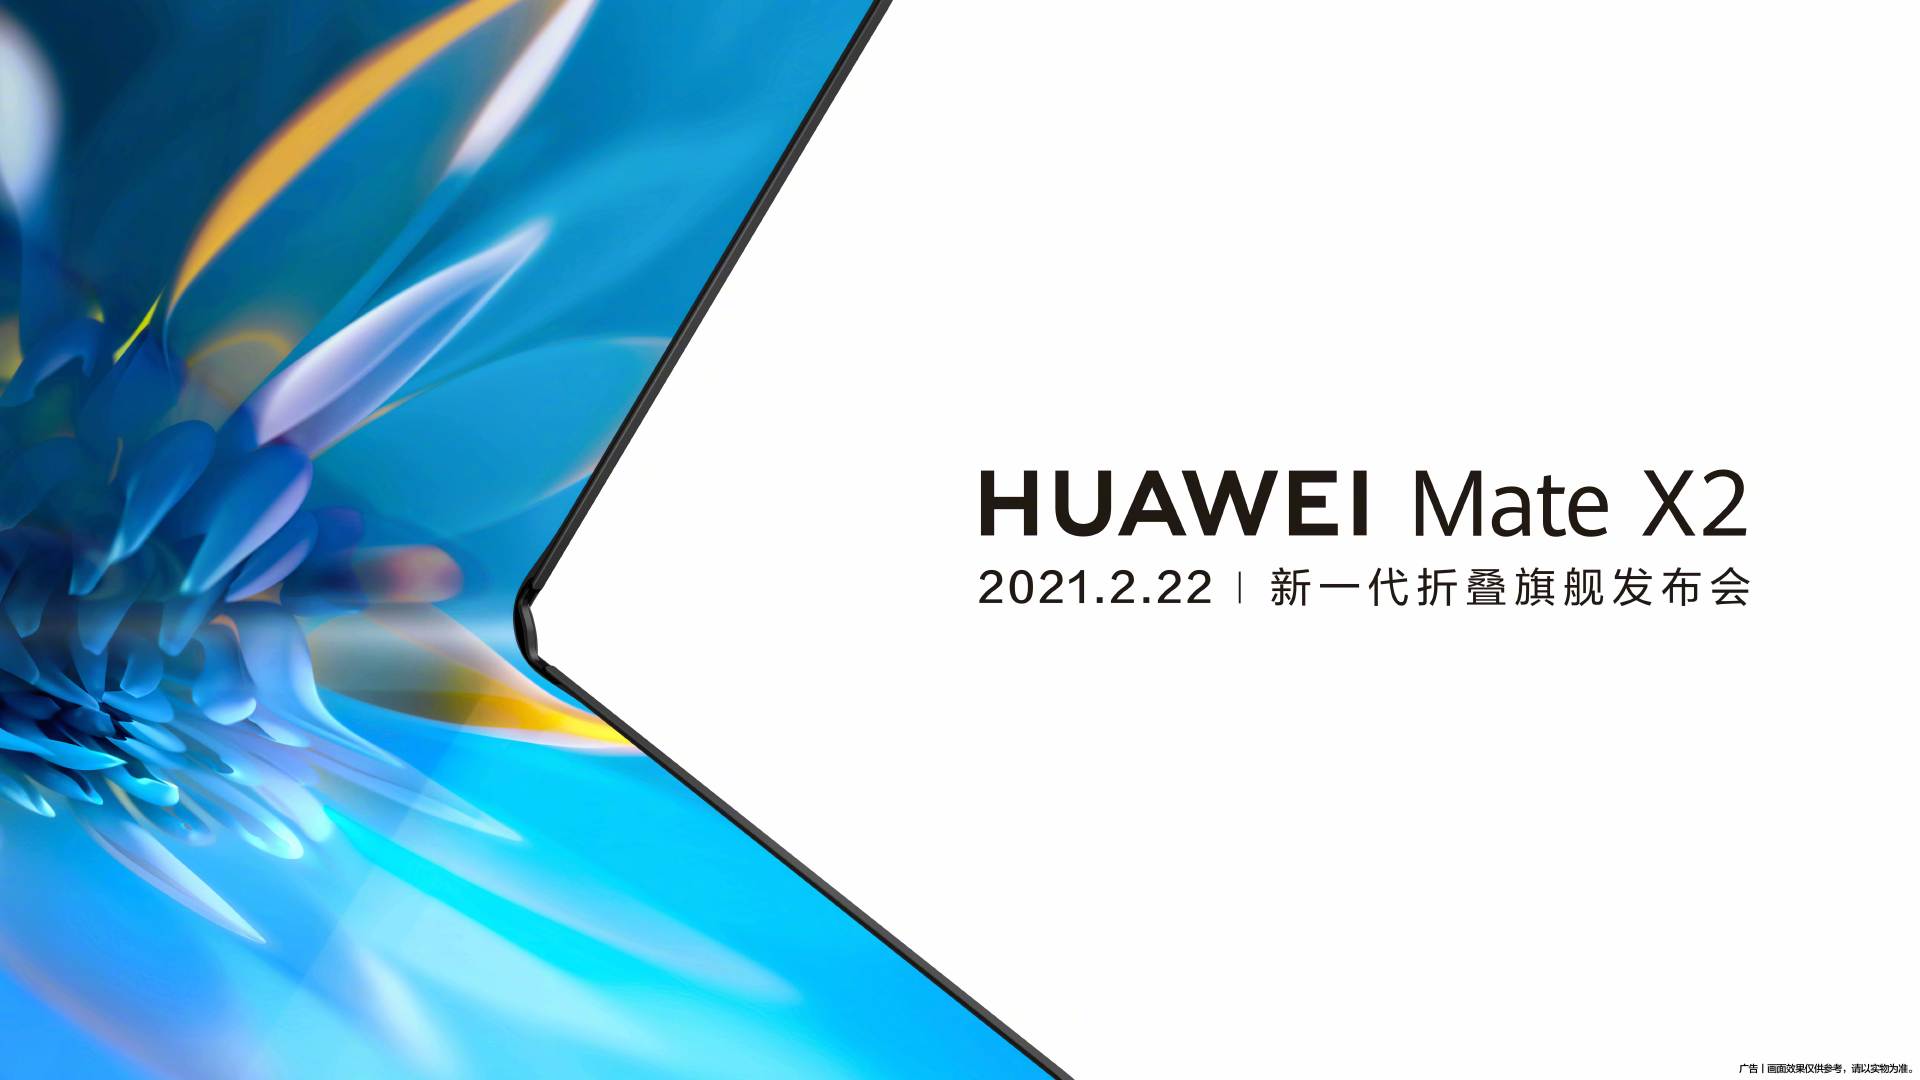 Huawei Mate X2 foldable launch date is February 22